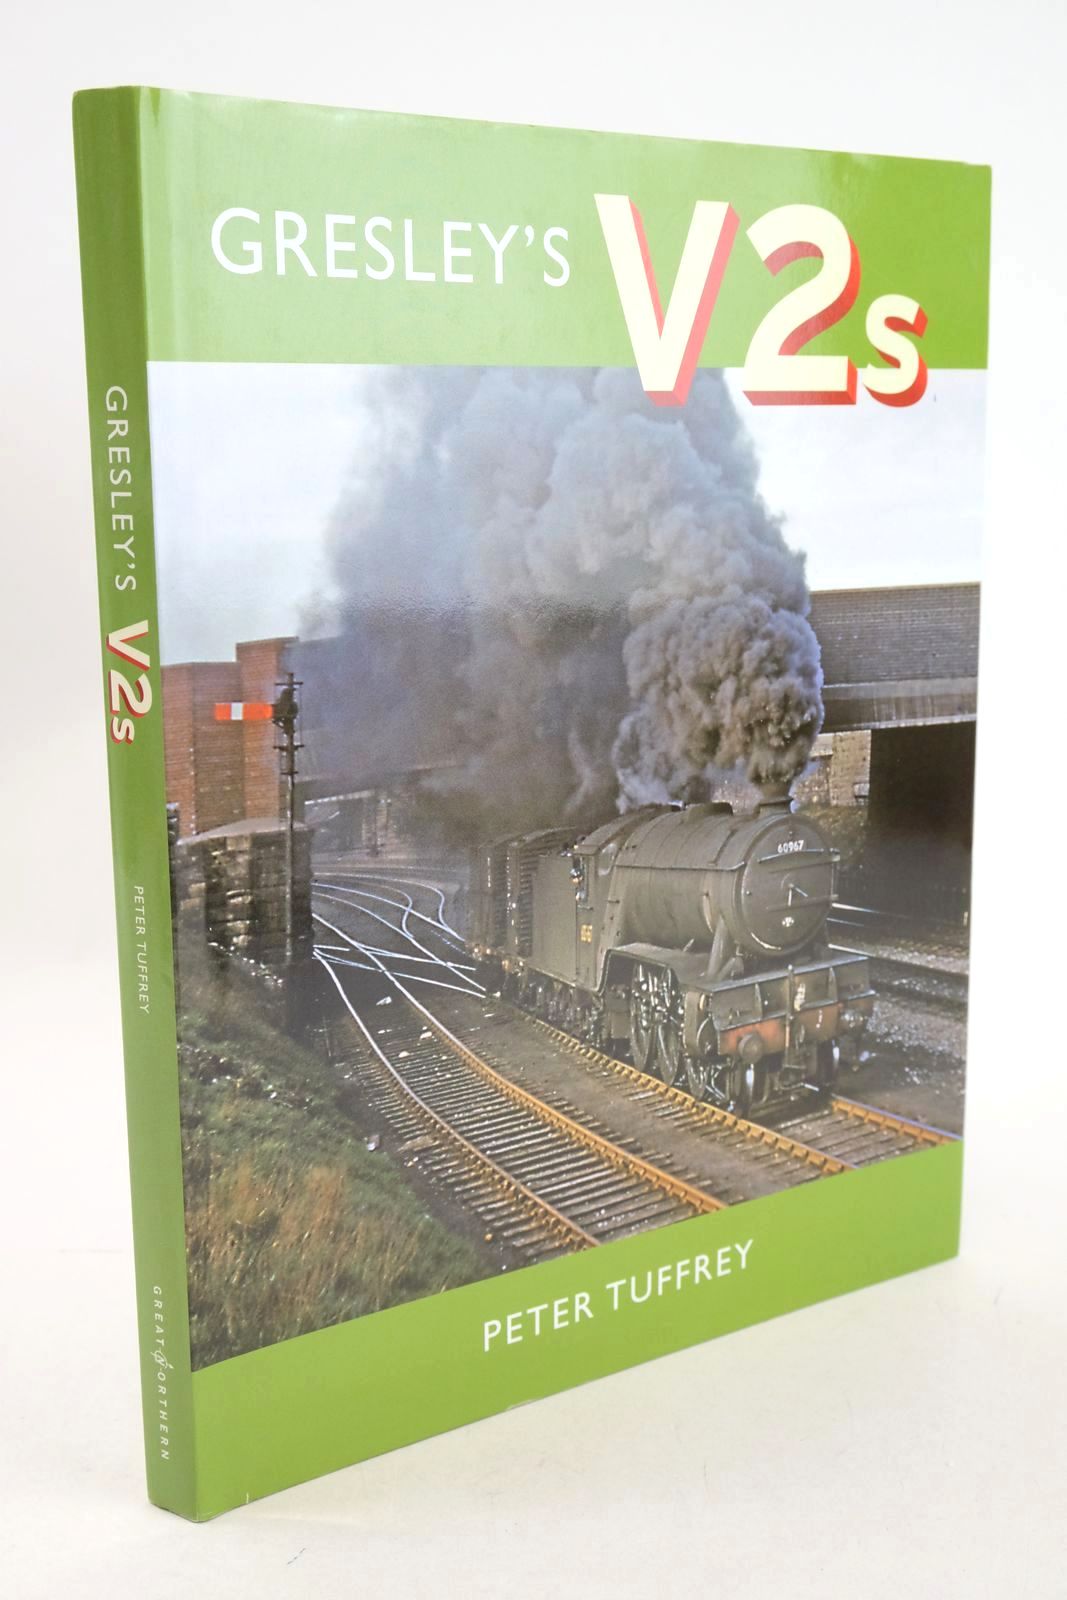 Photo of GRESLEY'S V2S written by Tuffrey, Peter published by Great Northern Books (STOCK CODE: 1327018)  for sale by Stella & Rose's Books